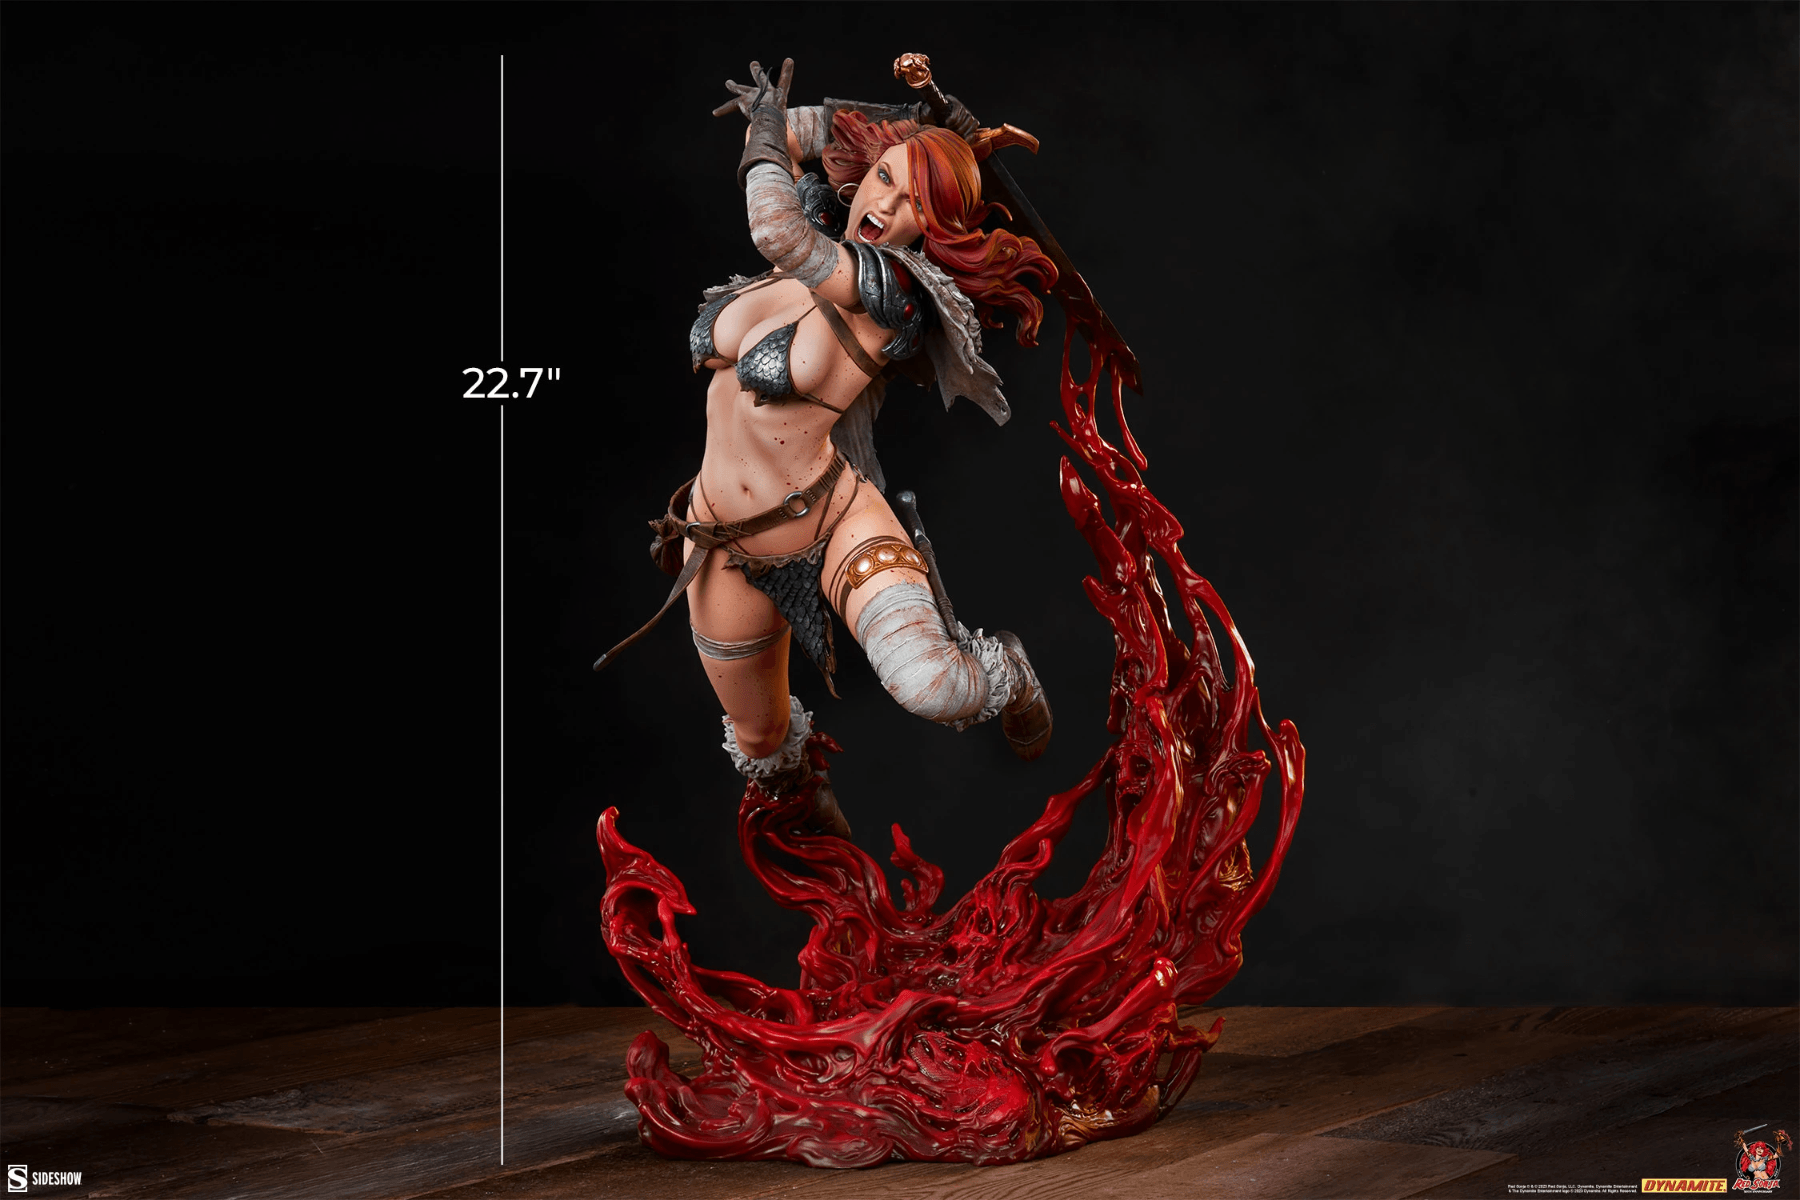 SID300813 Red Sonja - A Savage Sword Premium Format Statue - Sideshow Collectibles - Titan Pop Culture